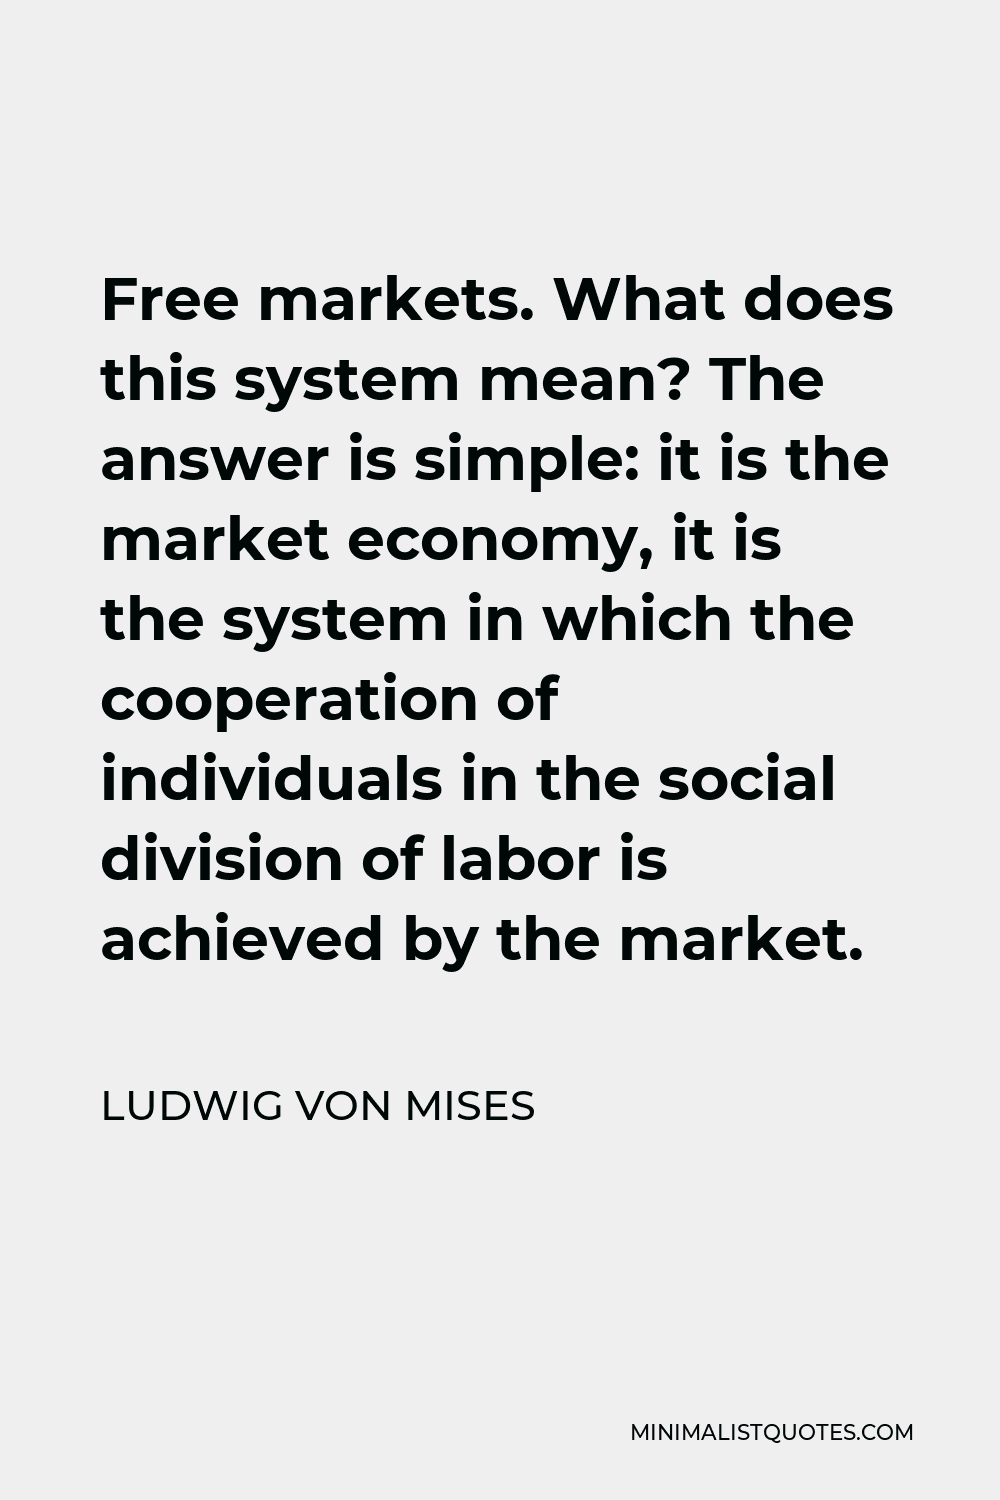 Ludwig von Mises Quote - Free markets. What does this system mean? The answer is simple: it is the market economy, it is the system in which the cooperation of individuals in the social division of labor is achieved by the market.